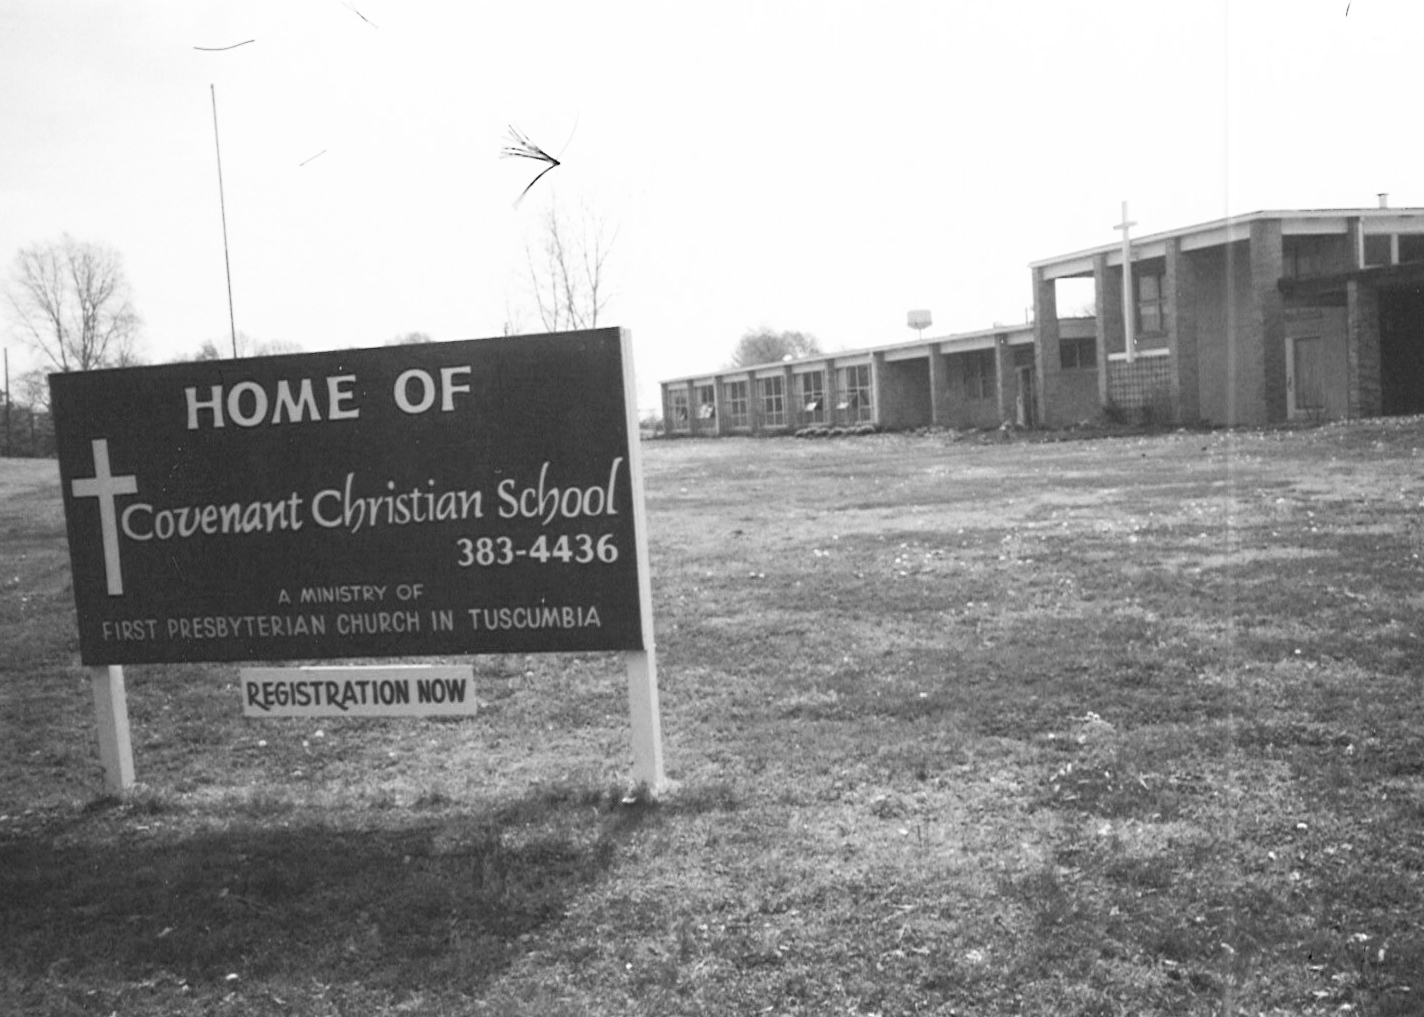 Early days of Covenant Christian